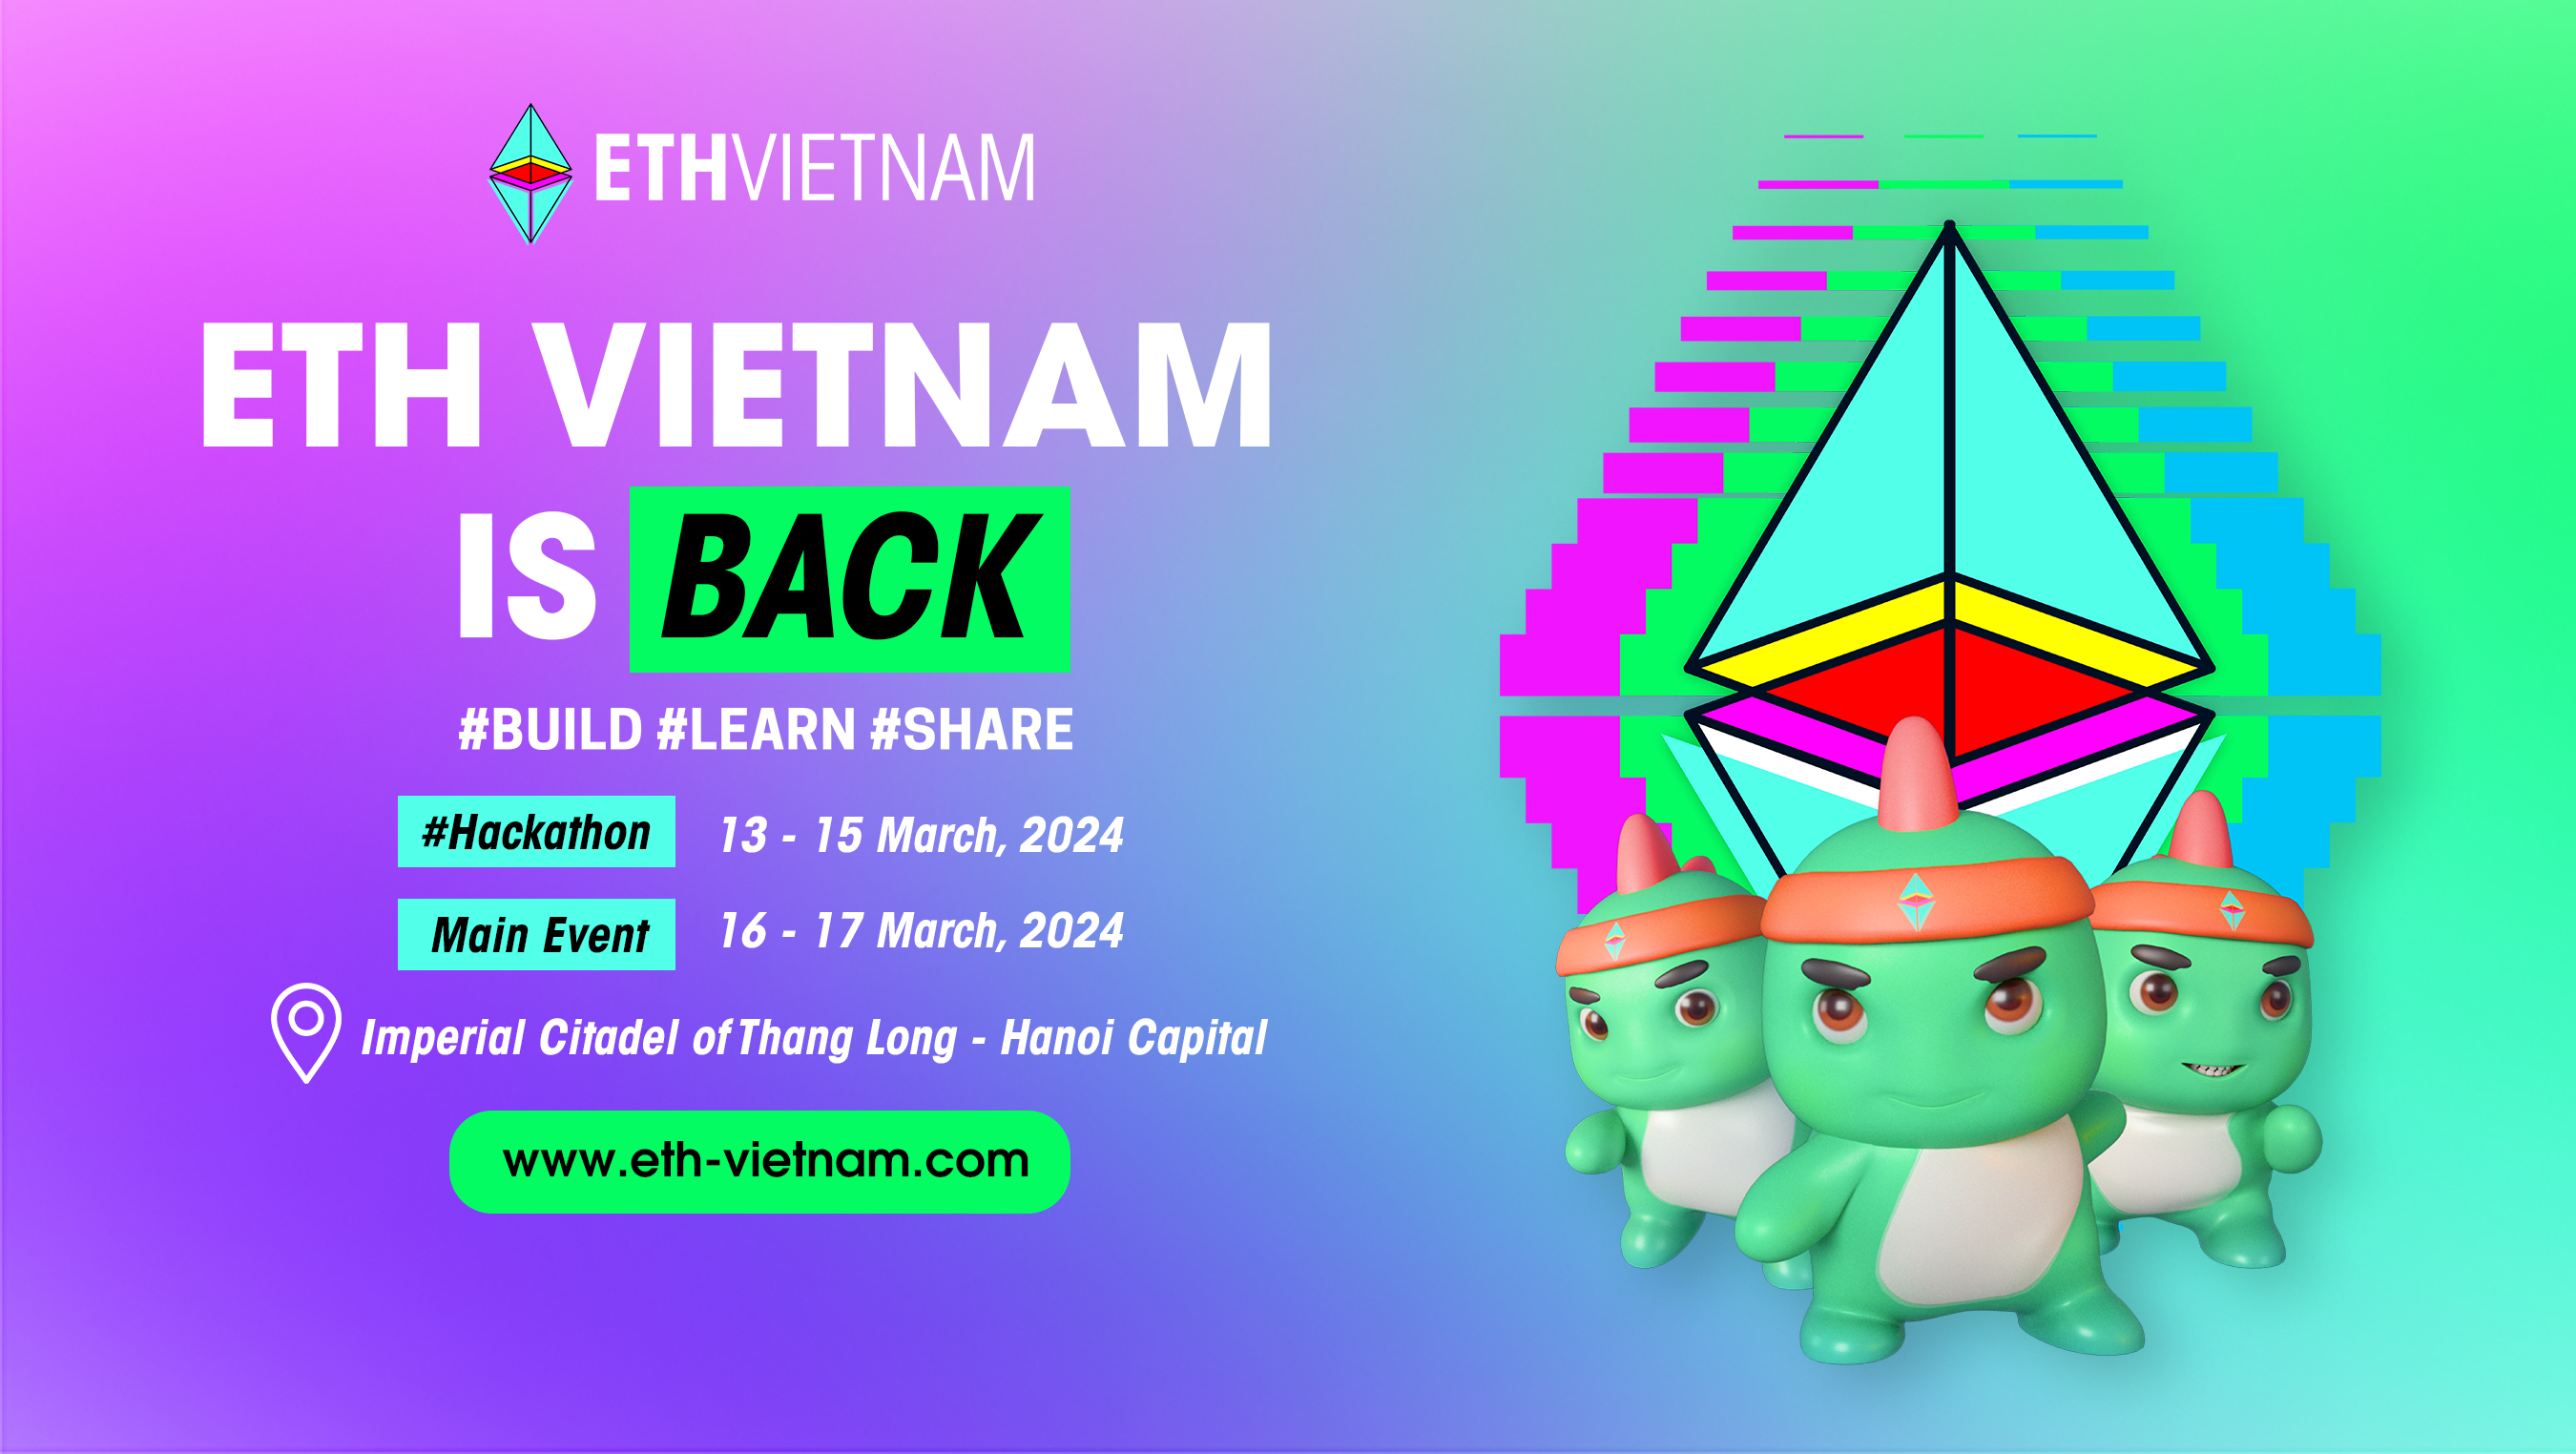 ETHVIETNAM IS BACK IN THIS MARCH